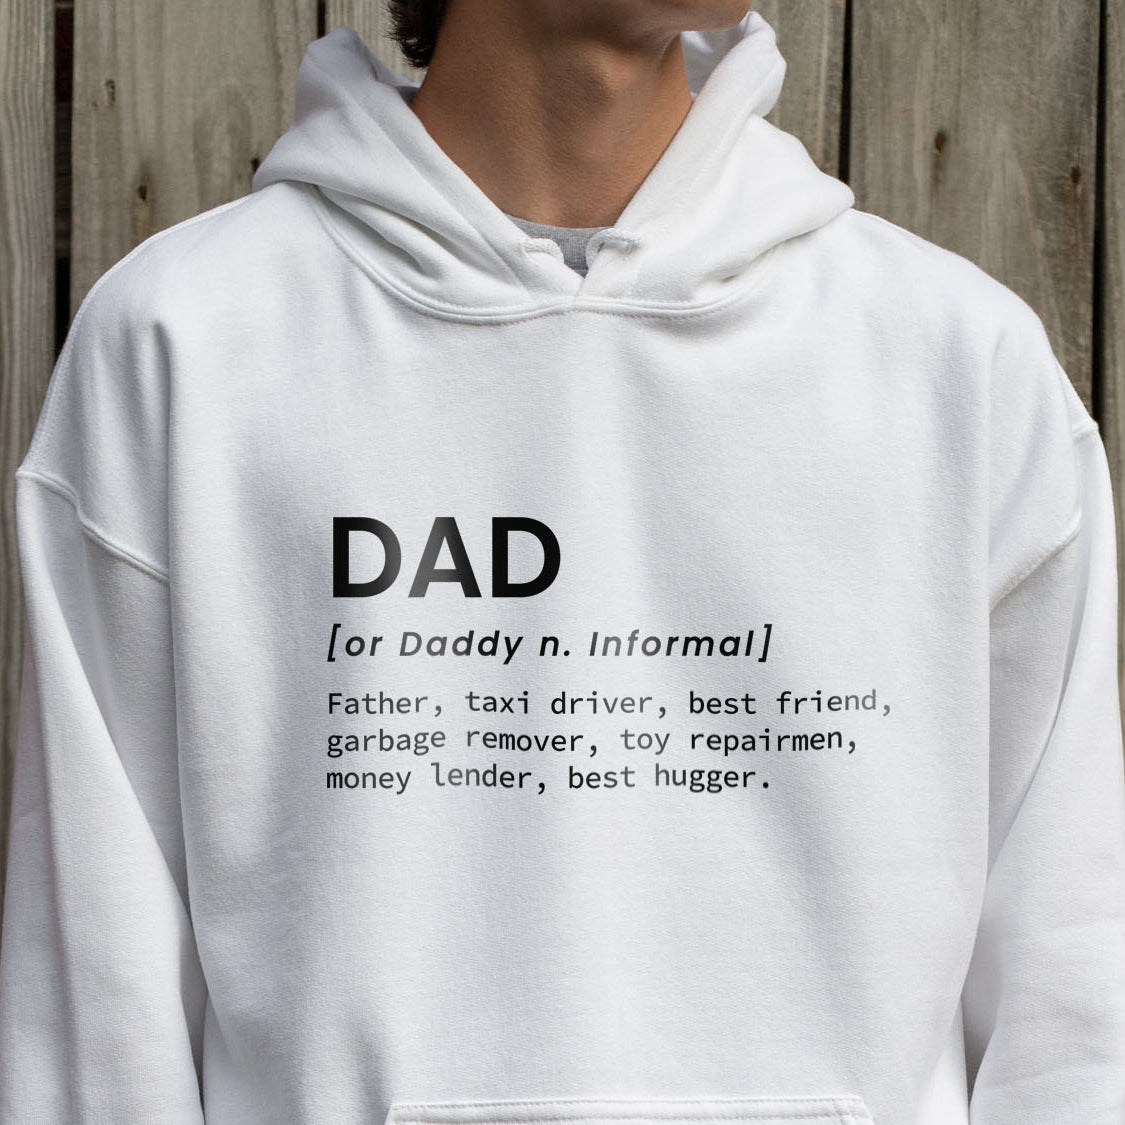 Funny Definition of Dad Hoodie - Funny Family Retro Vintage Design Printed Hoodie